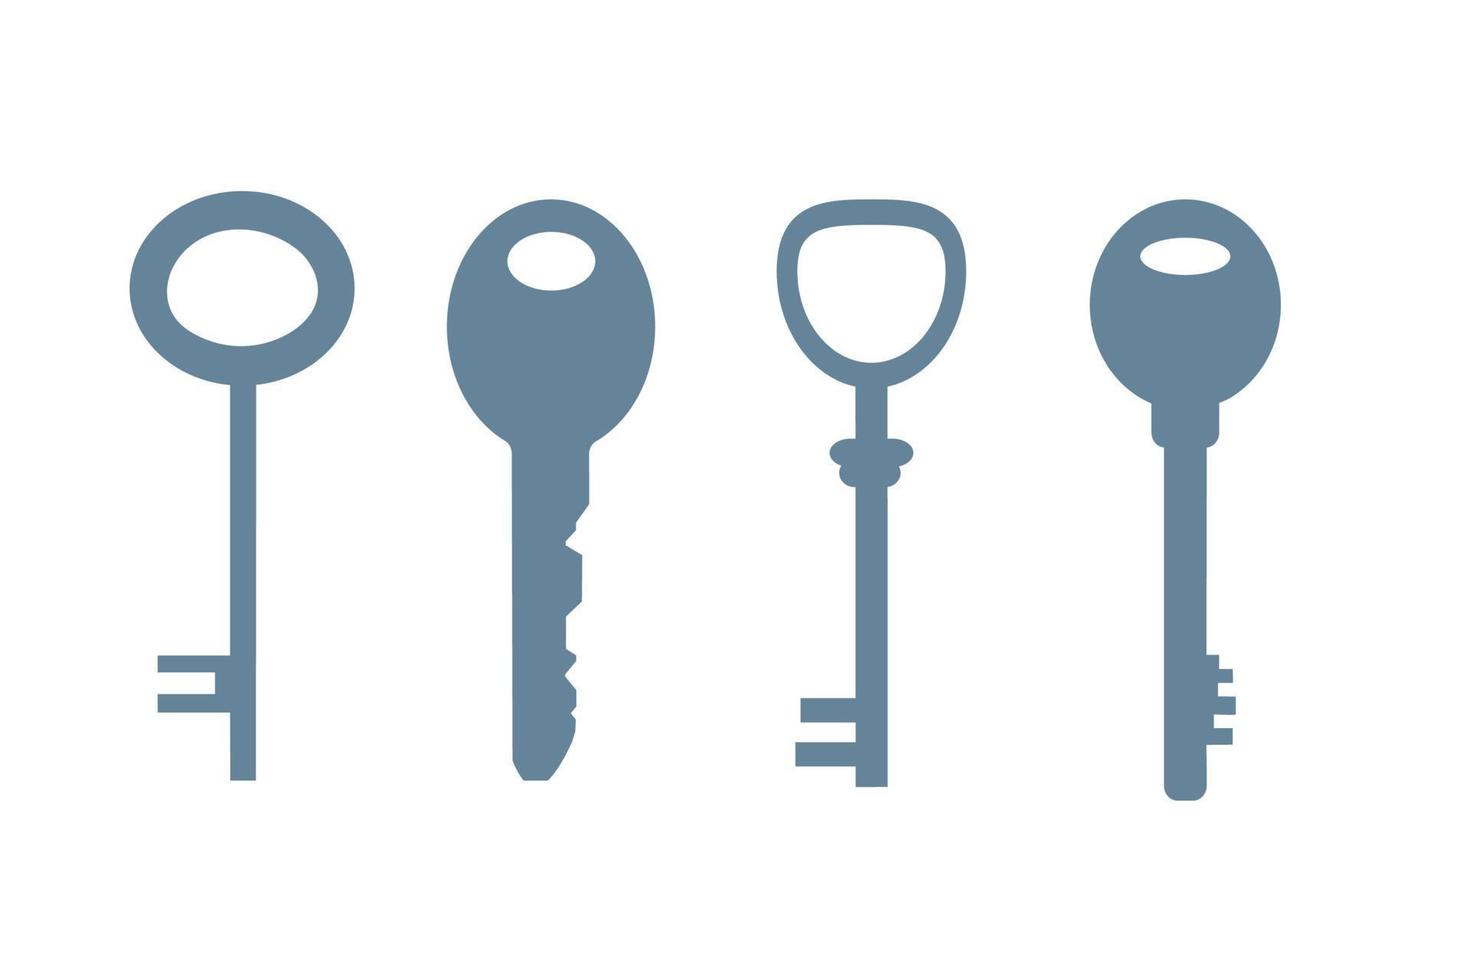 Set of keys in flat style. Vector illustration isolated on white background.